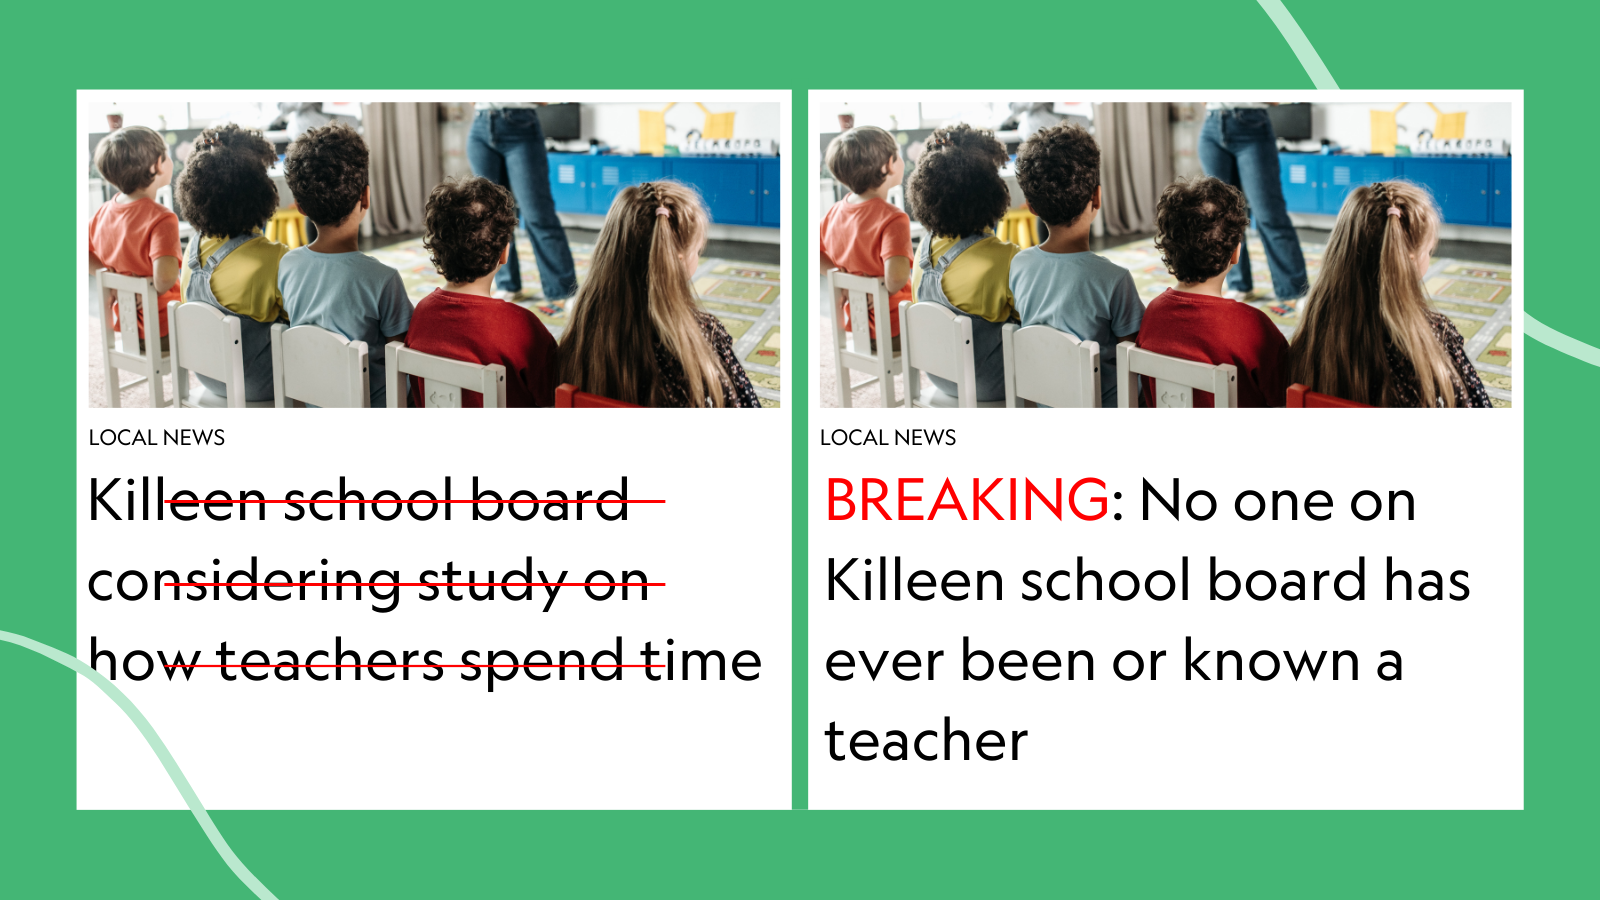 We Fixed These 9 Inaccurate Education Headlines